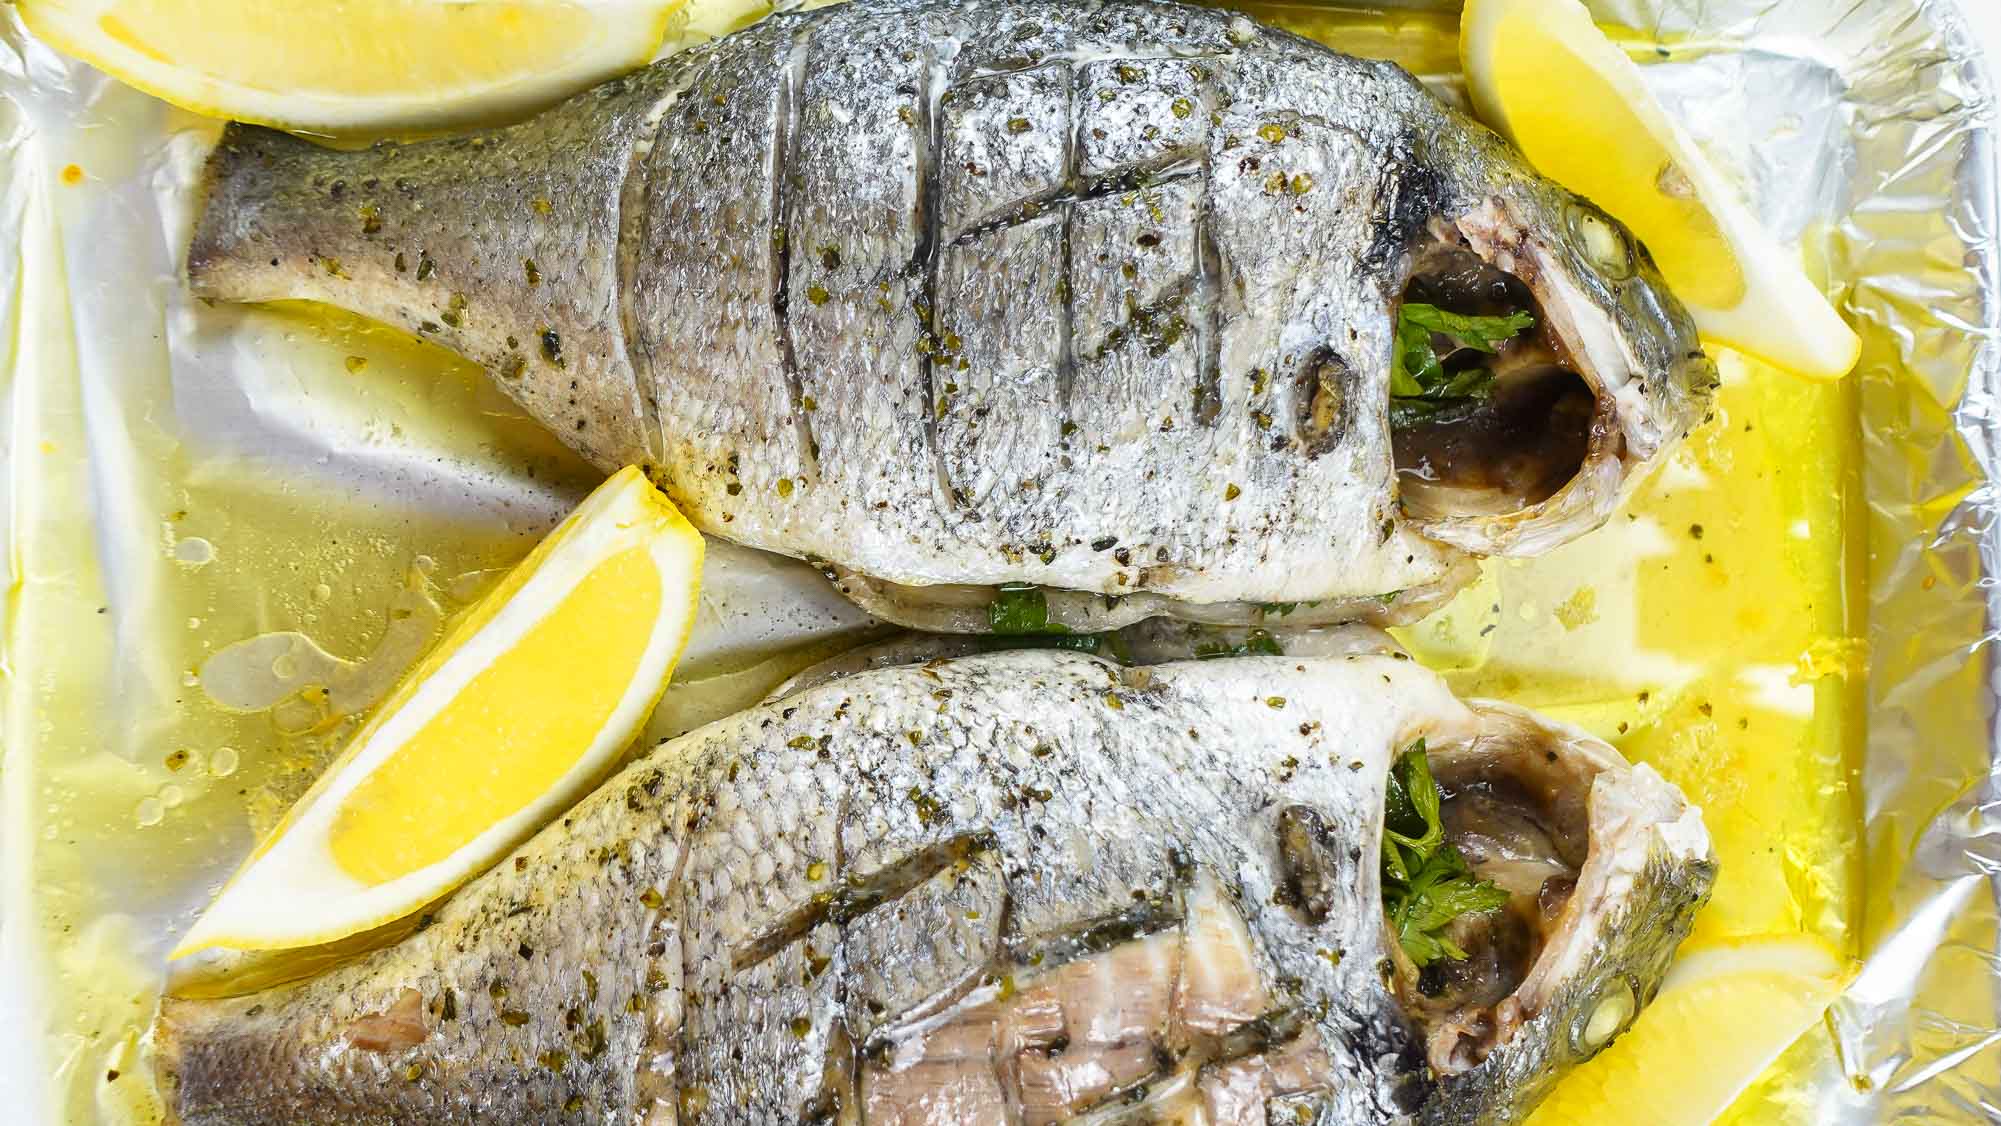 Foil baked Sea Bream with fresh lemon slices on a tray.